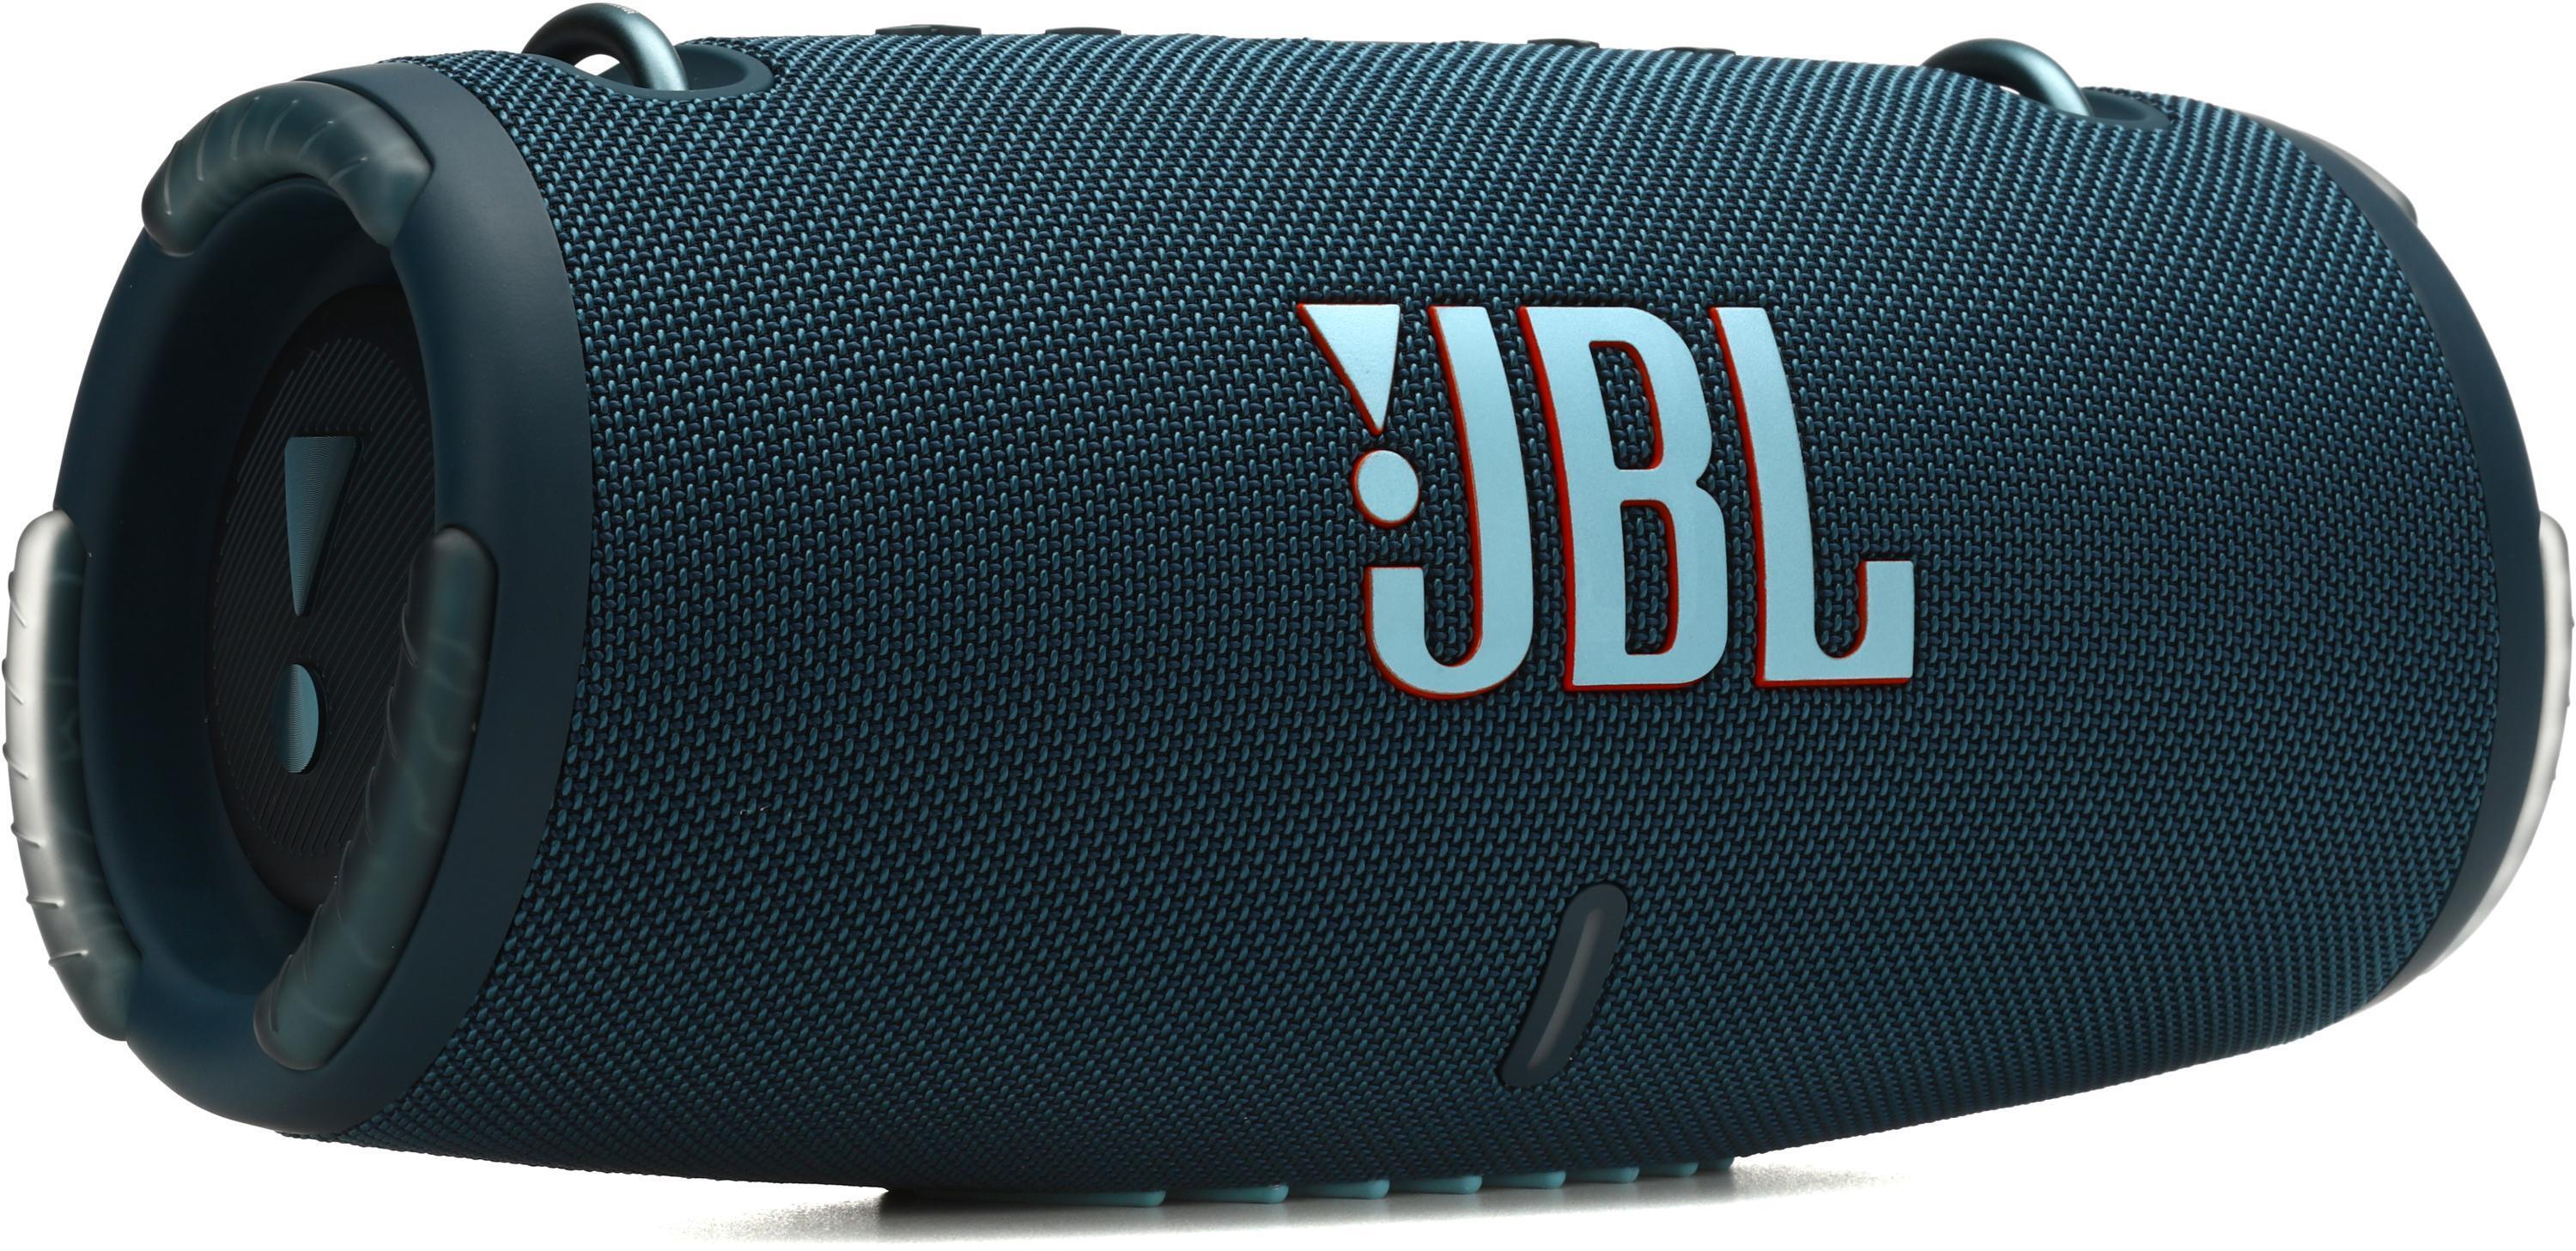 PARTS* JBL Xtreme 2 Portable Bluetooth Waterproof Speaker - GRILL  ONLY!(part)